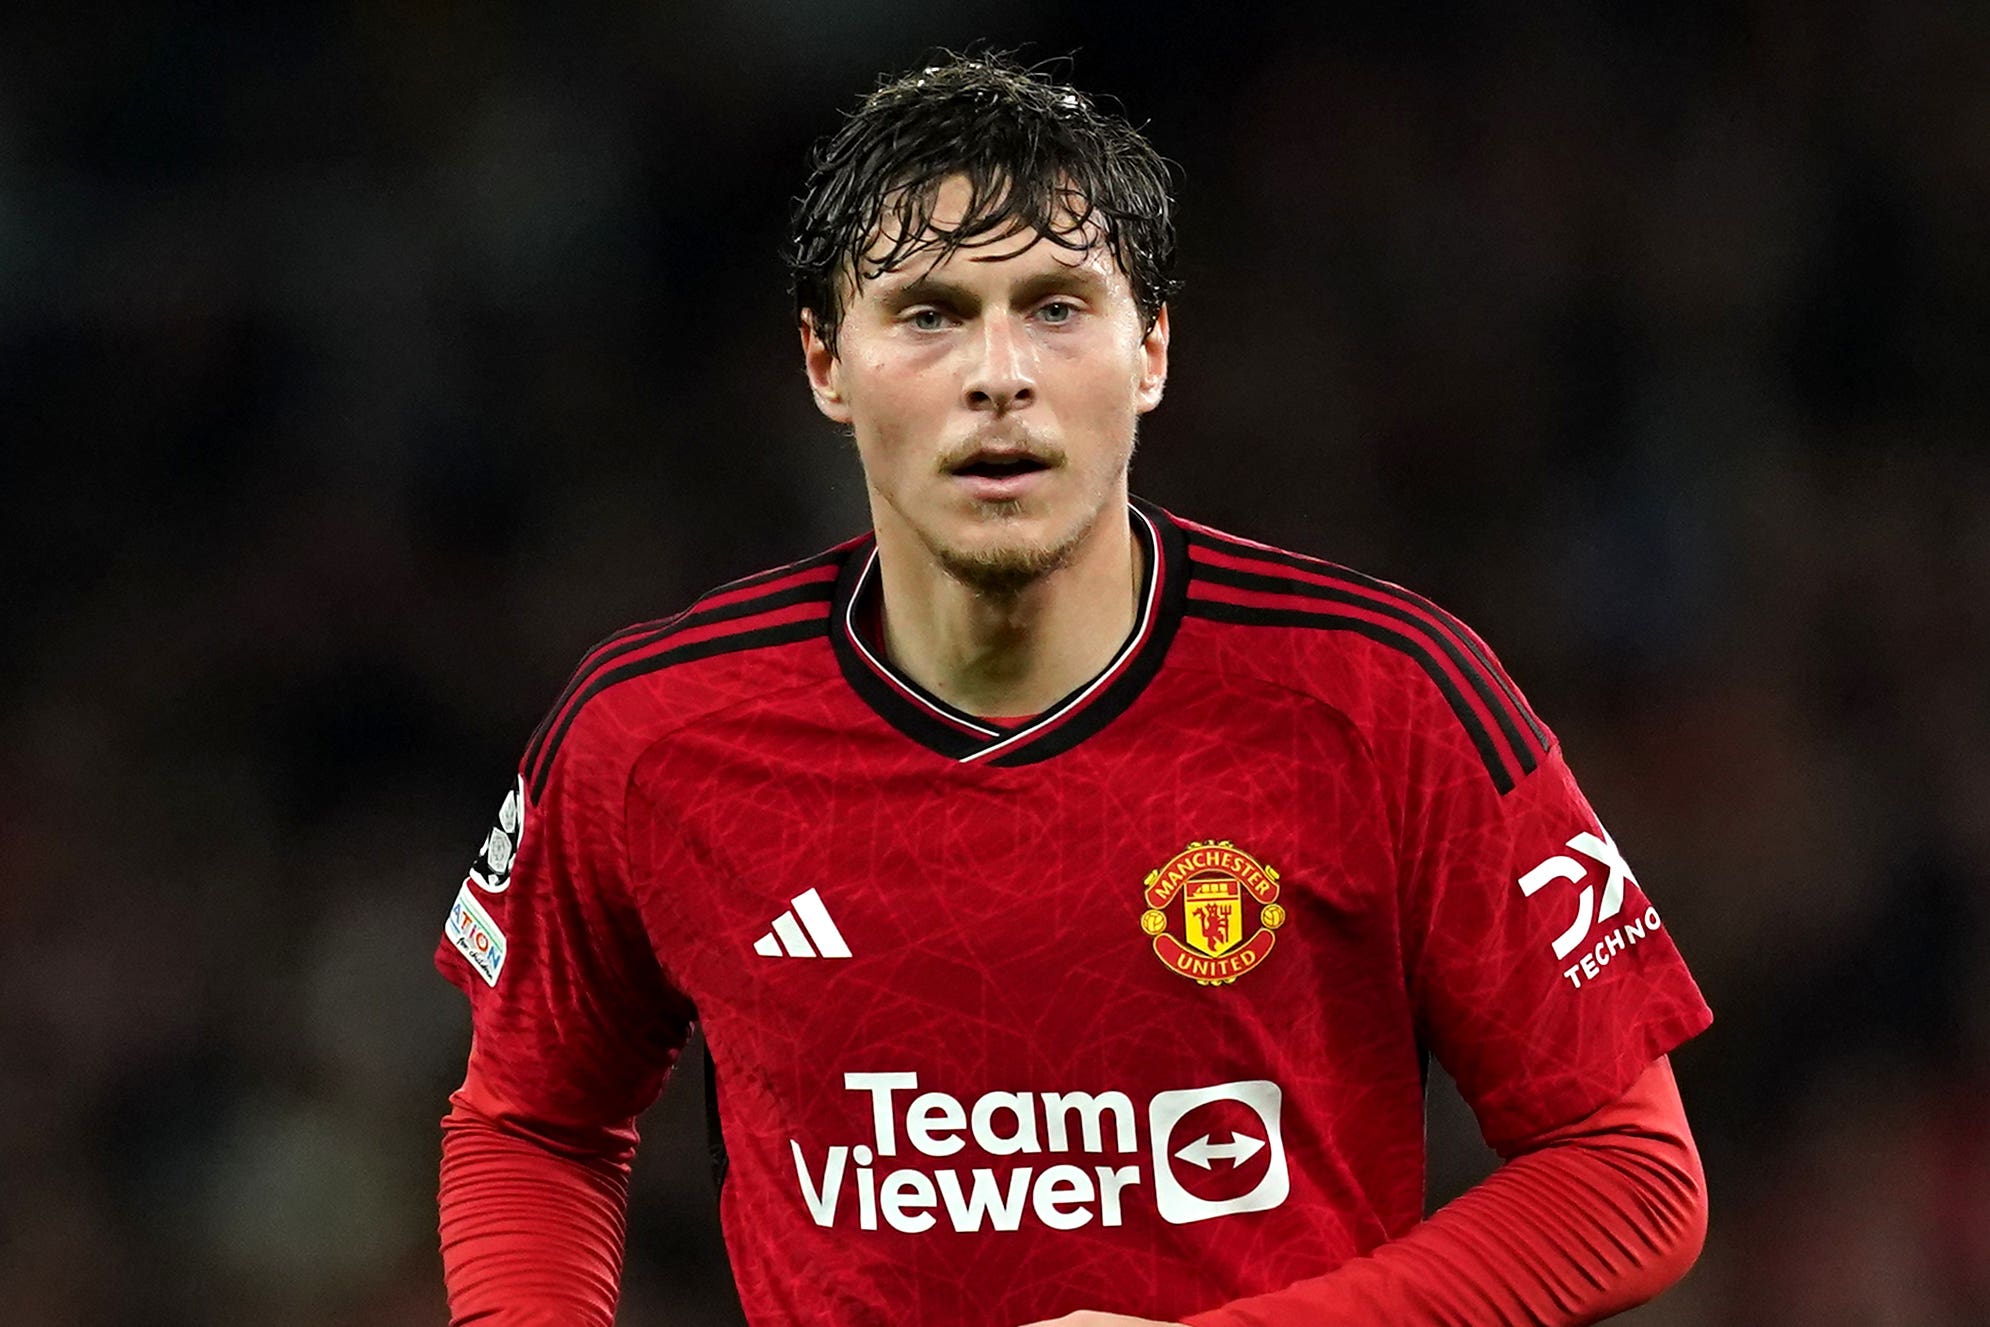 Victor Lindelof in action for Manchester United.